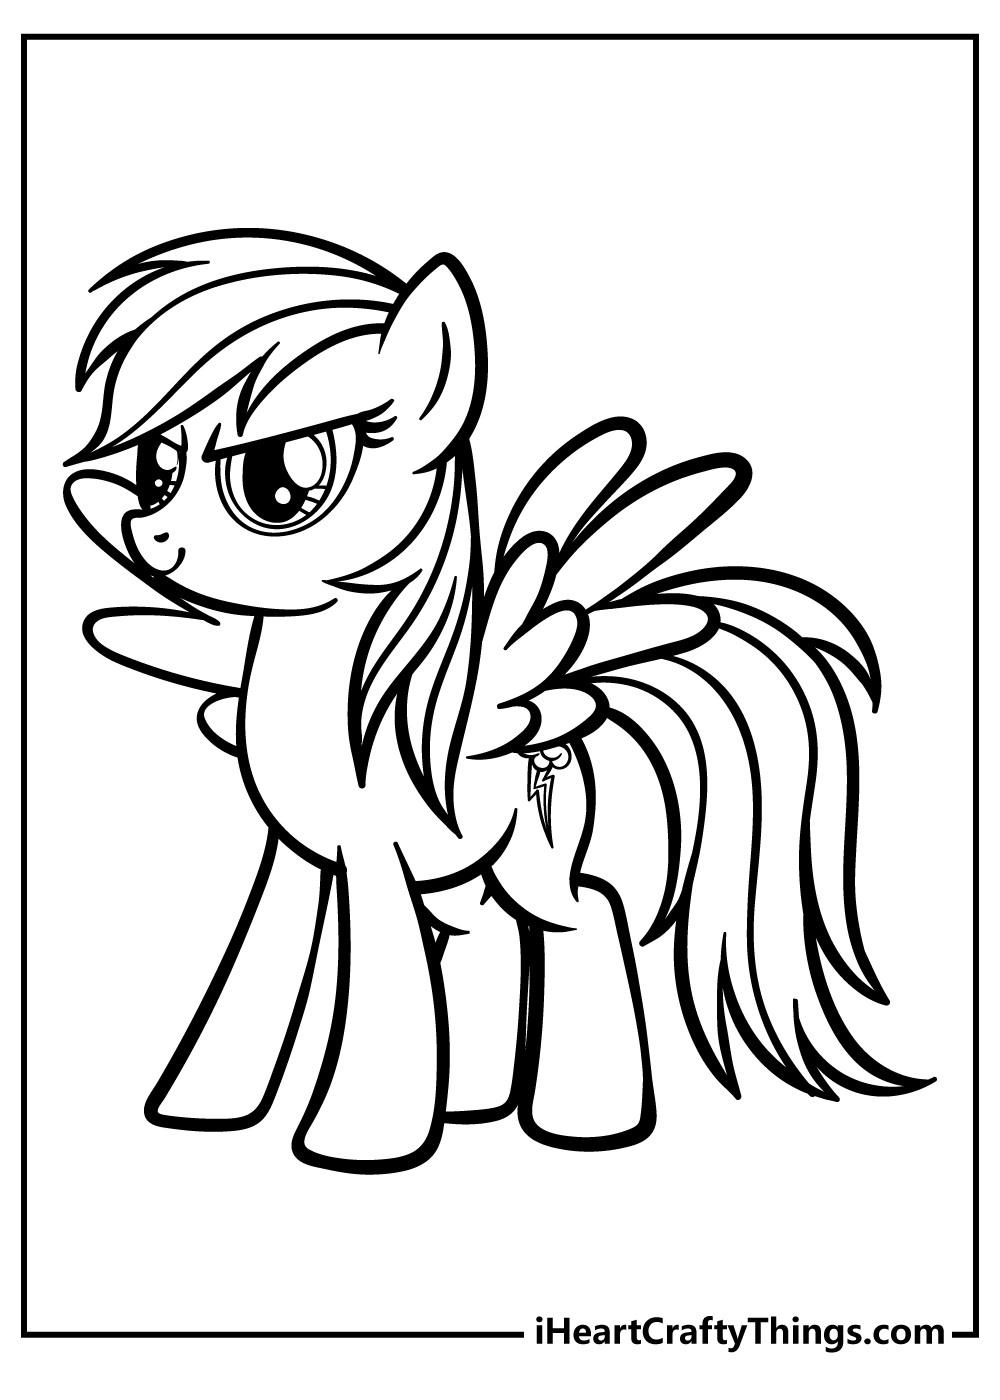 Rainbow dash coloring pages free printables